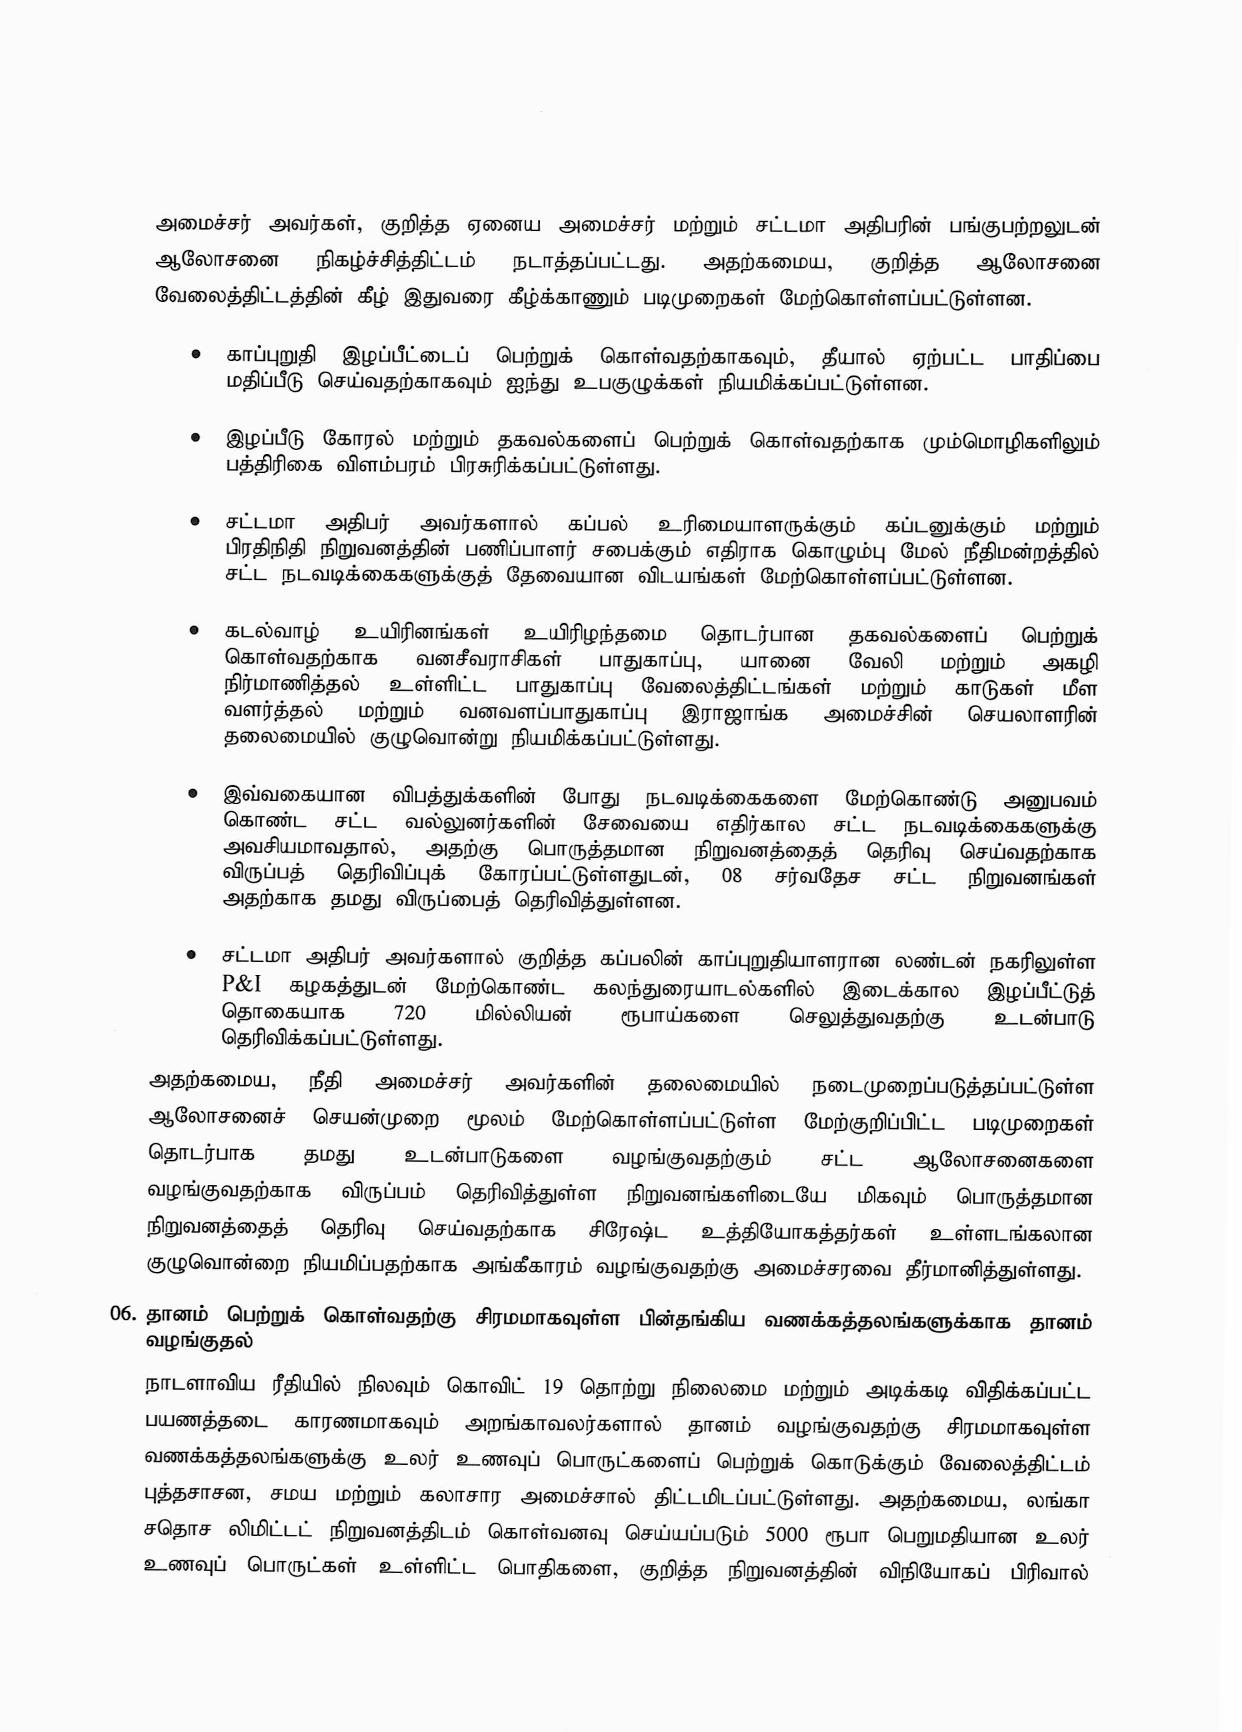 Cabinet Decision on 28.06.2021 Tamil page 003